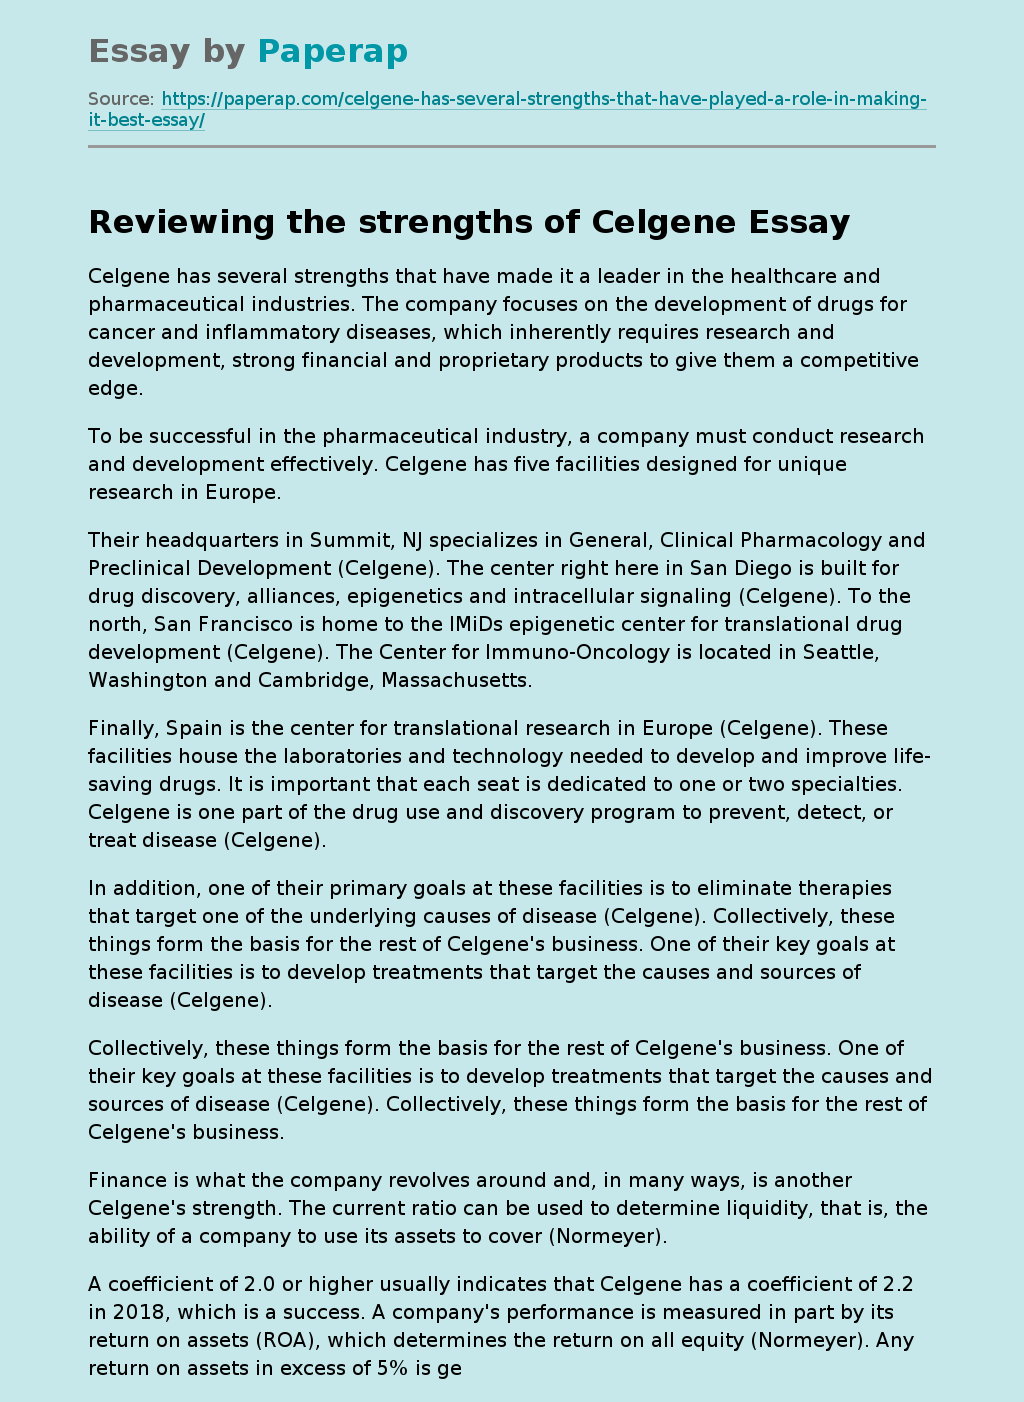 Reviewing the strengths of Celgene